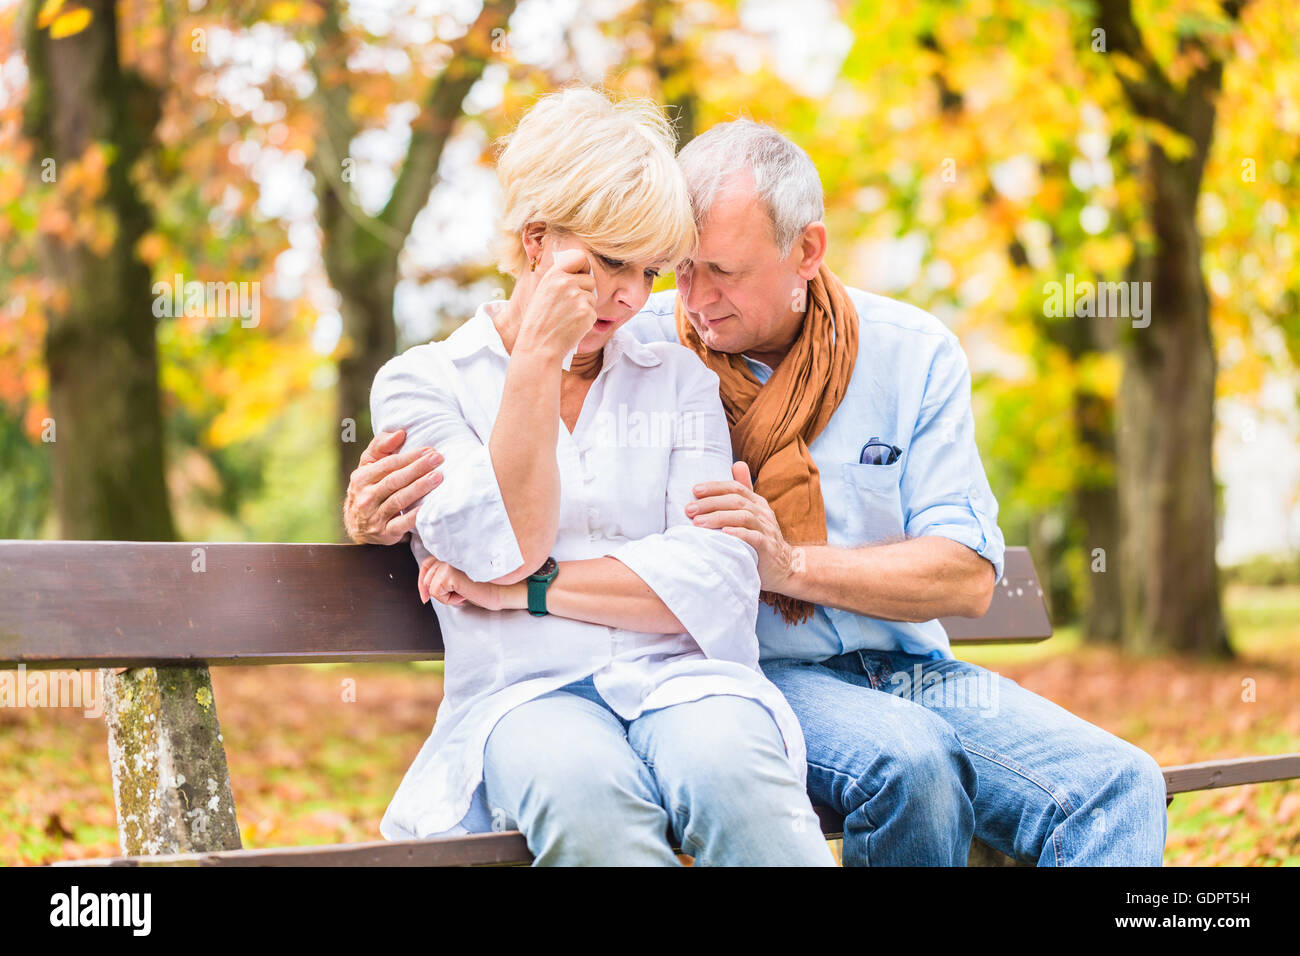 Senior man and woman having being sad embracing each other Stock Photo